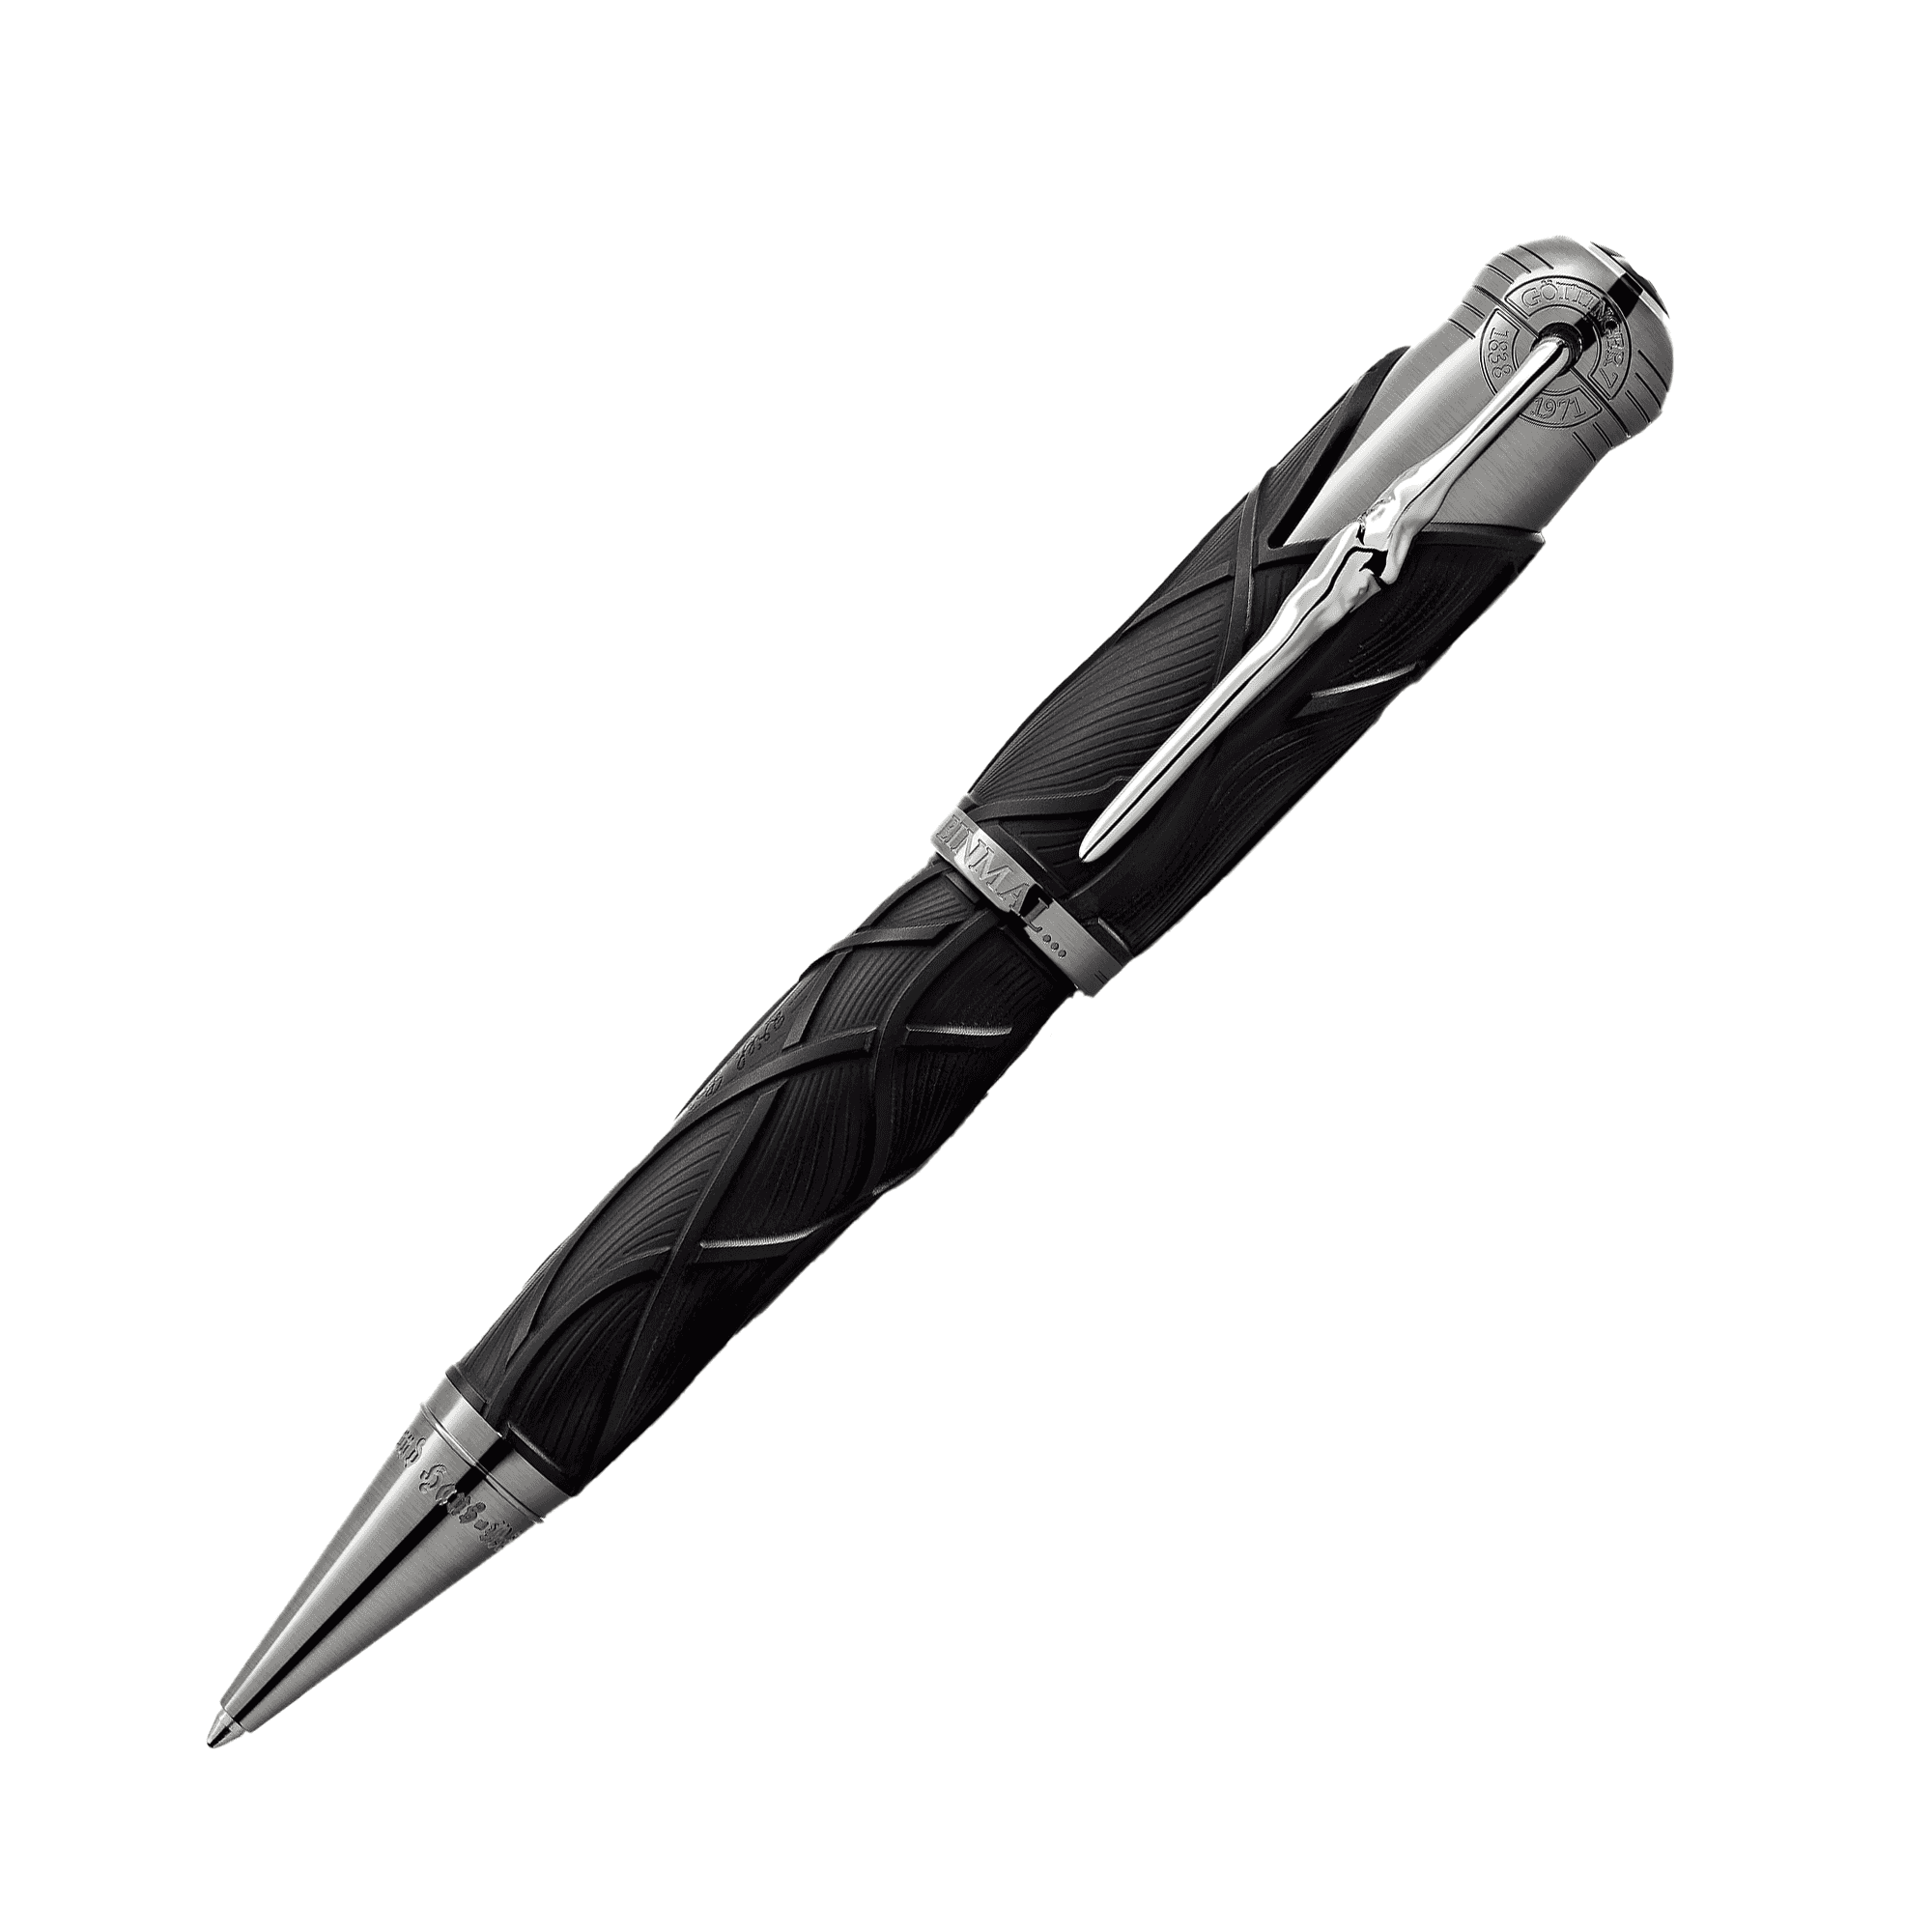 Writers Edition Homage to Brothers Grimm Limited Edition Ballpoint Pen